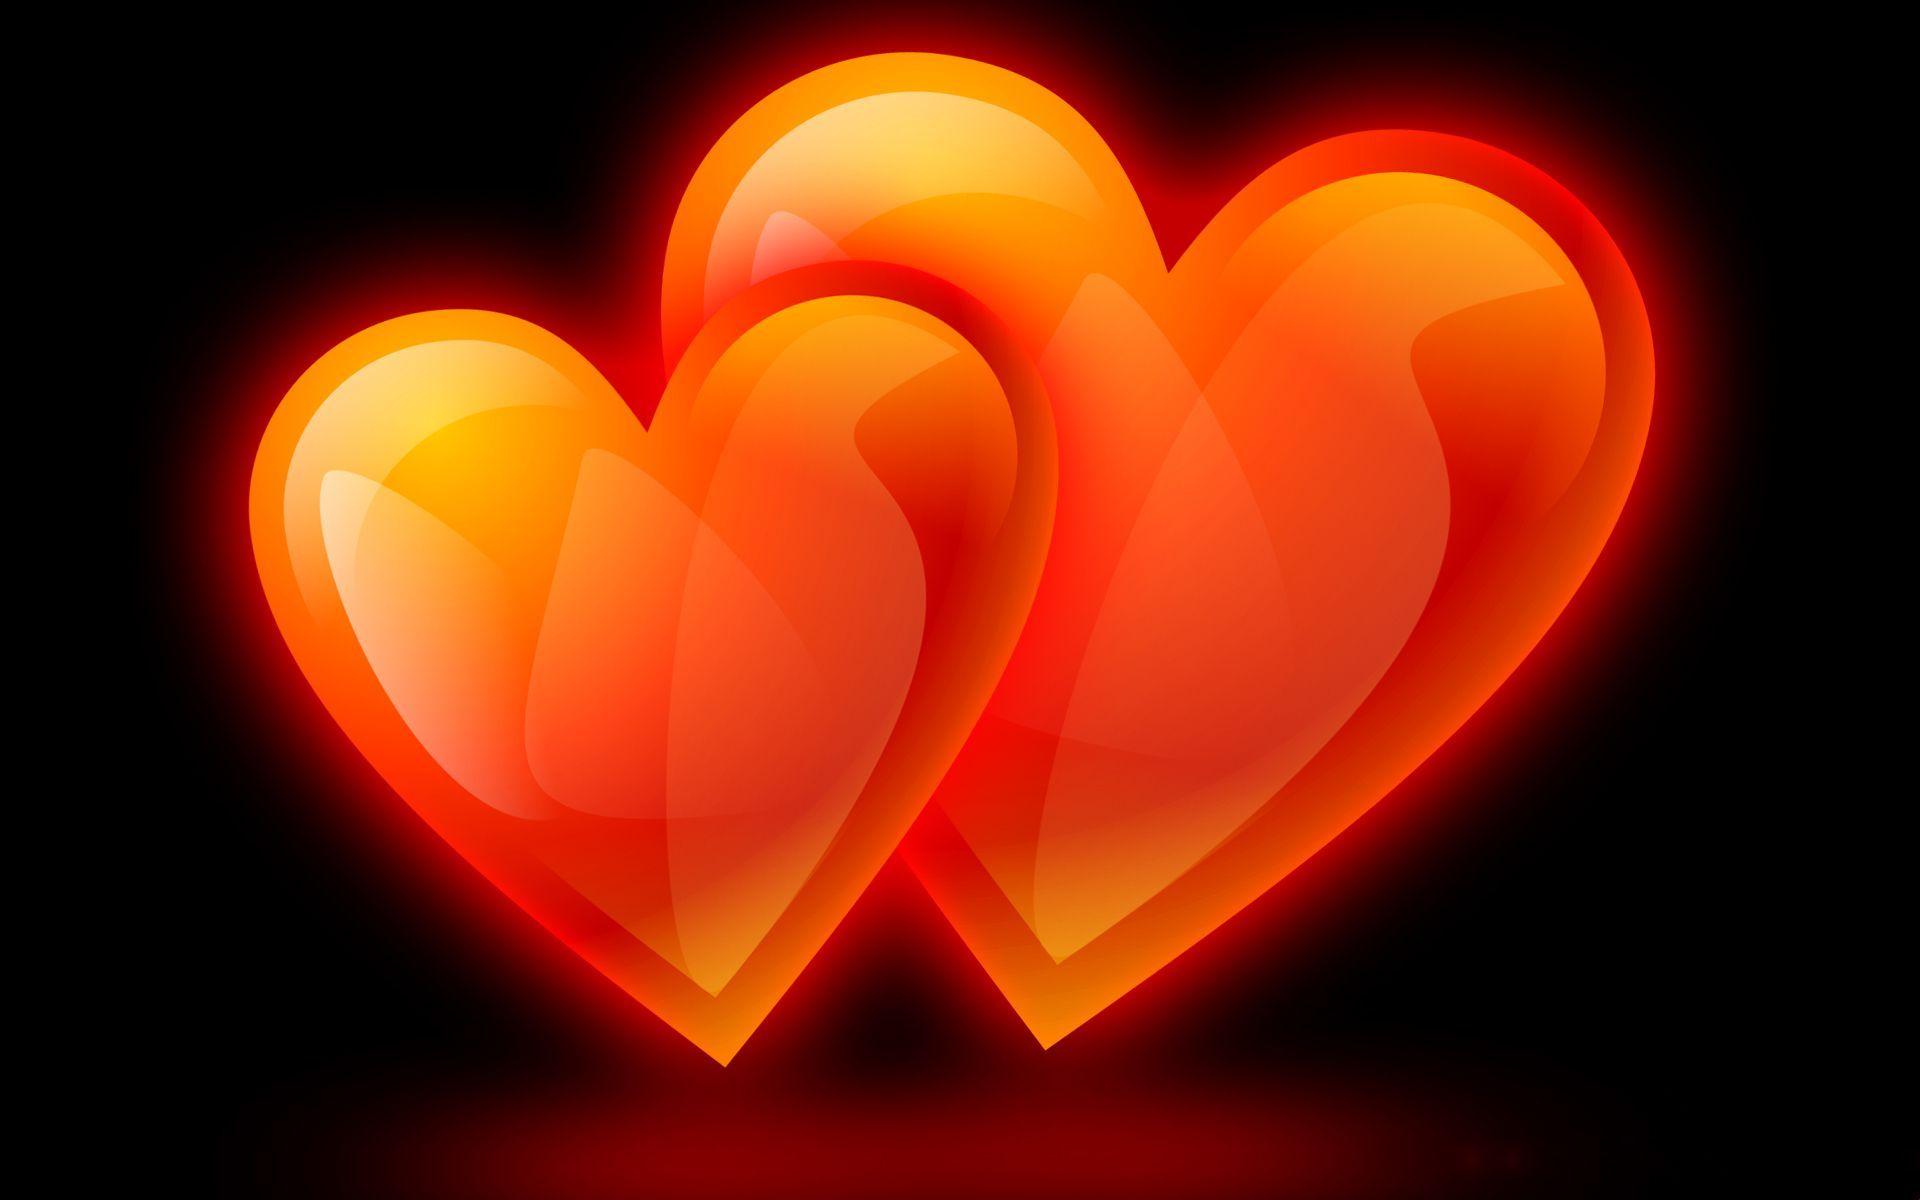 Hearts Black Background Wallpaper Image & Picture